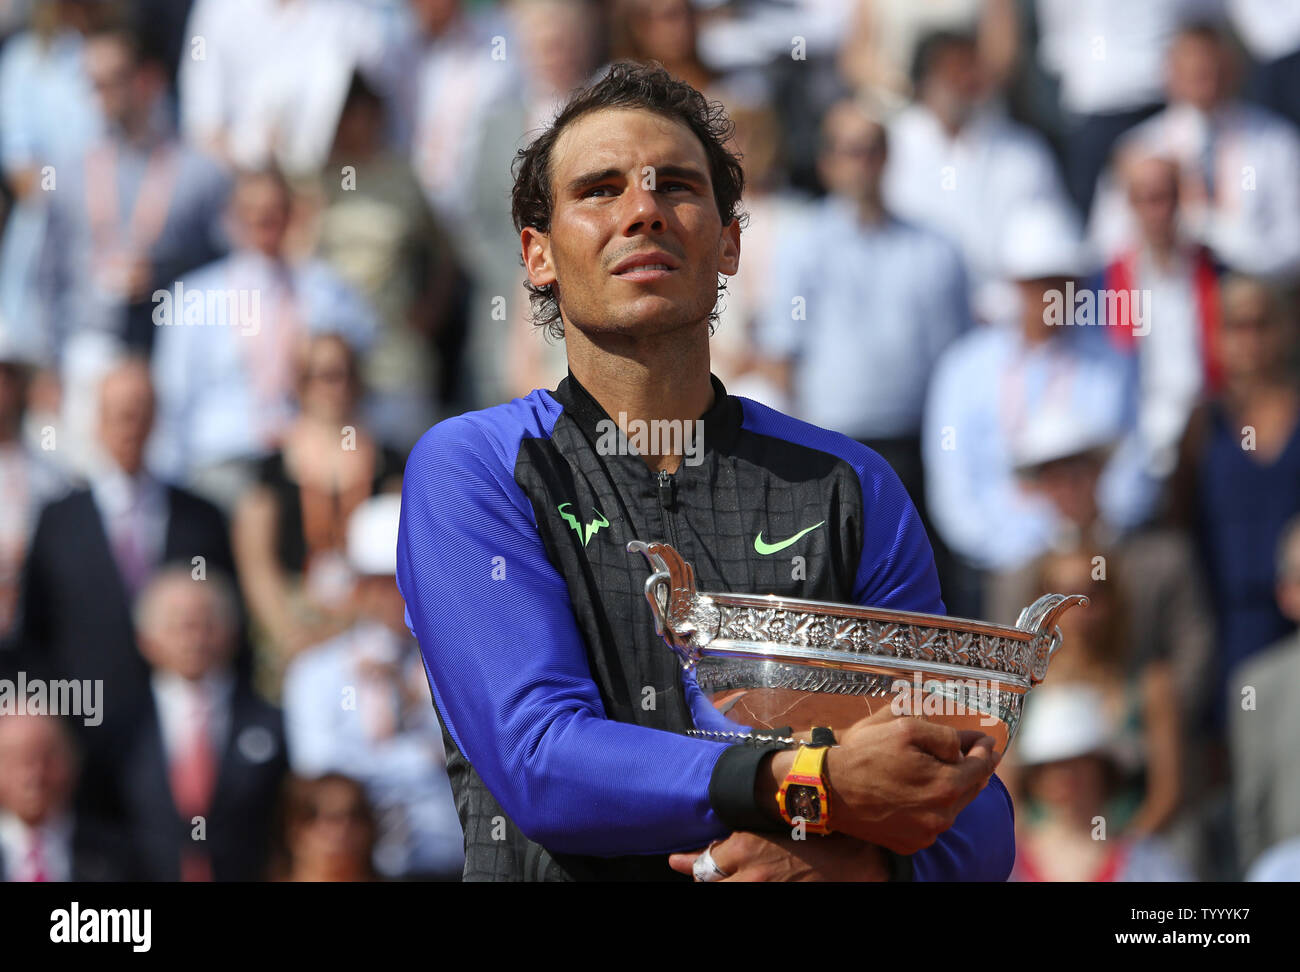 Rafael Nadal of Spain holds the championship trophy after winning his French  Open men's final match against Stan Wawrinka of Switzerland at Roland Garros  in Paris on June 11, 2017. Nadal defeated